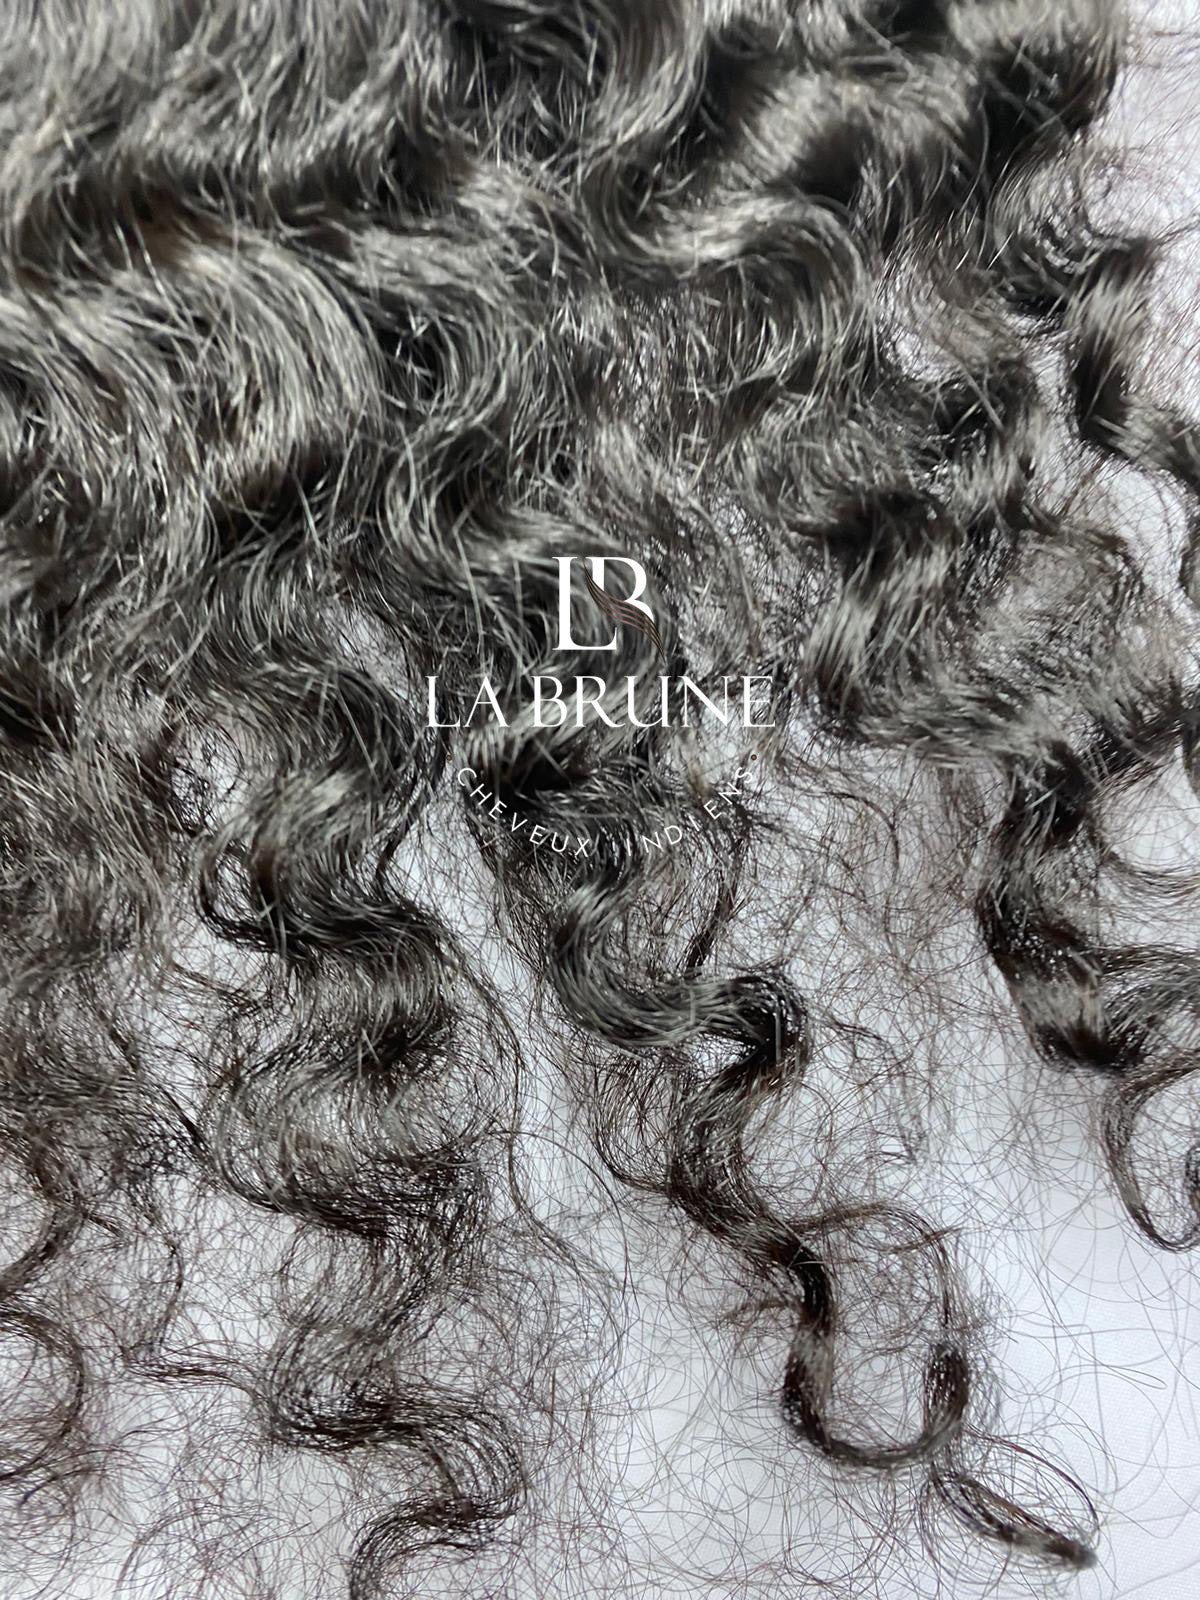 CLOSURE SWISS LACE CURLY